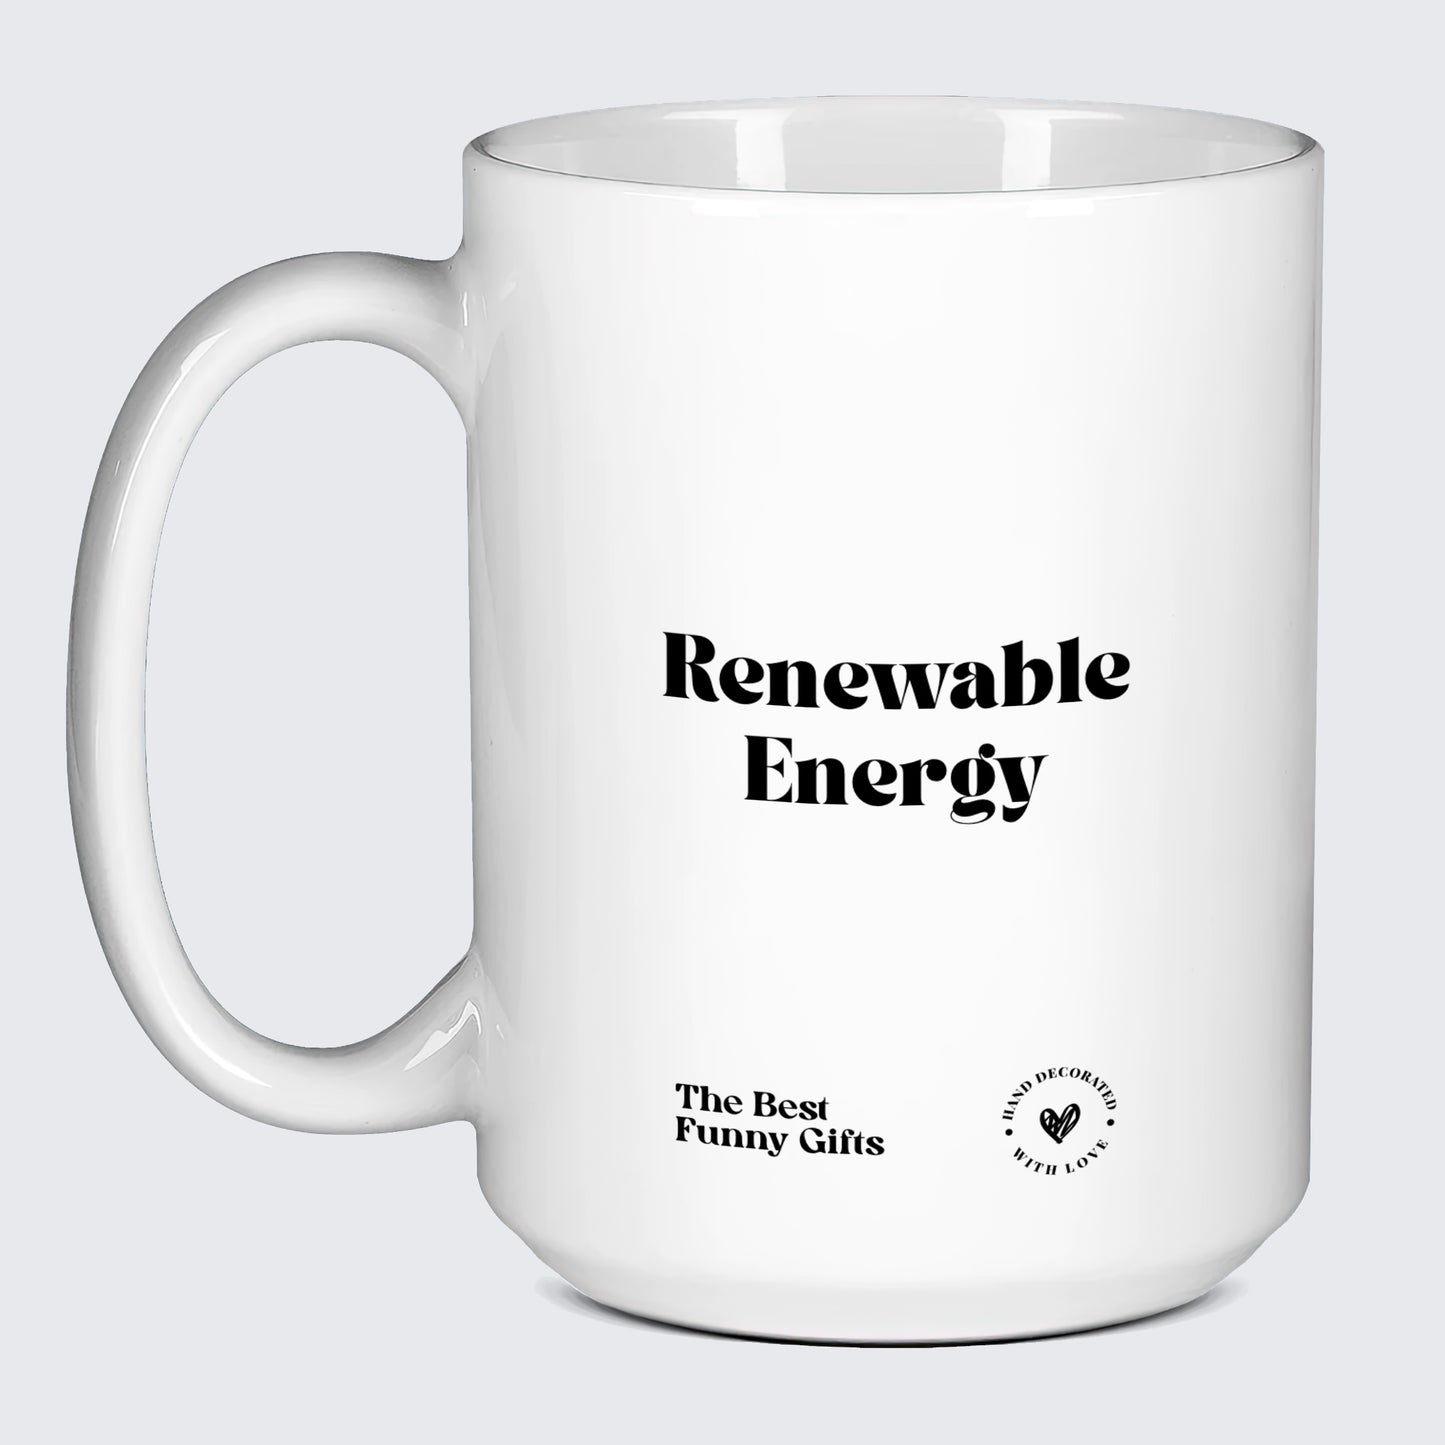 Unique Coffee Mugs Renewable Energy - The Best Funny Gifts